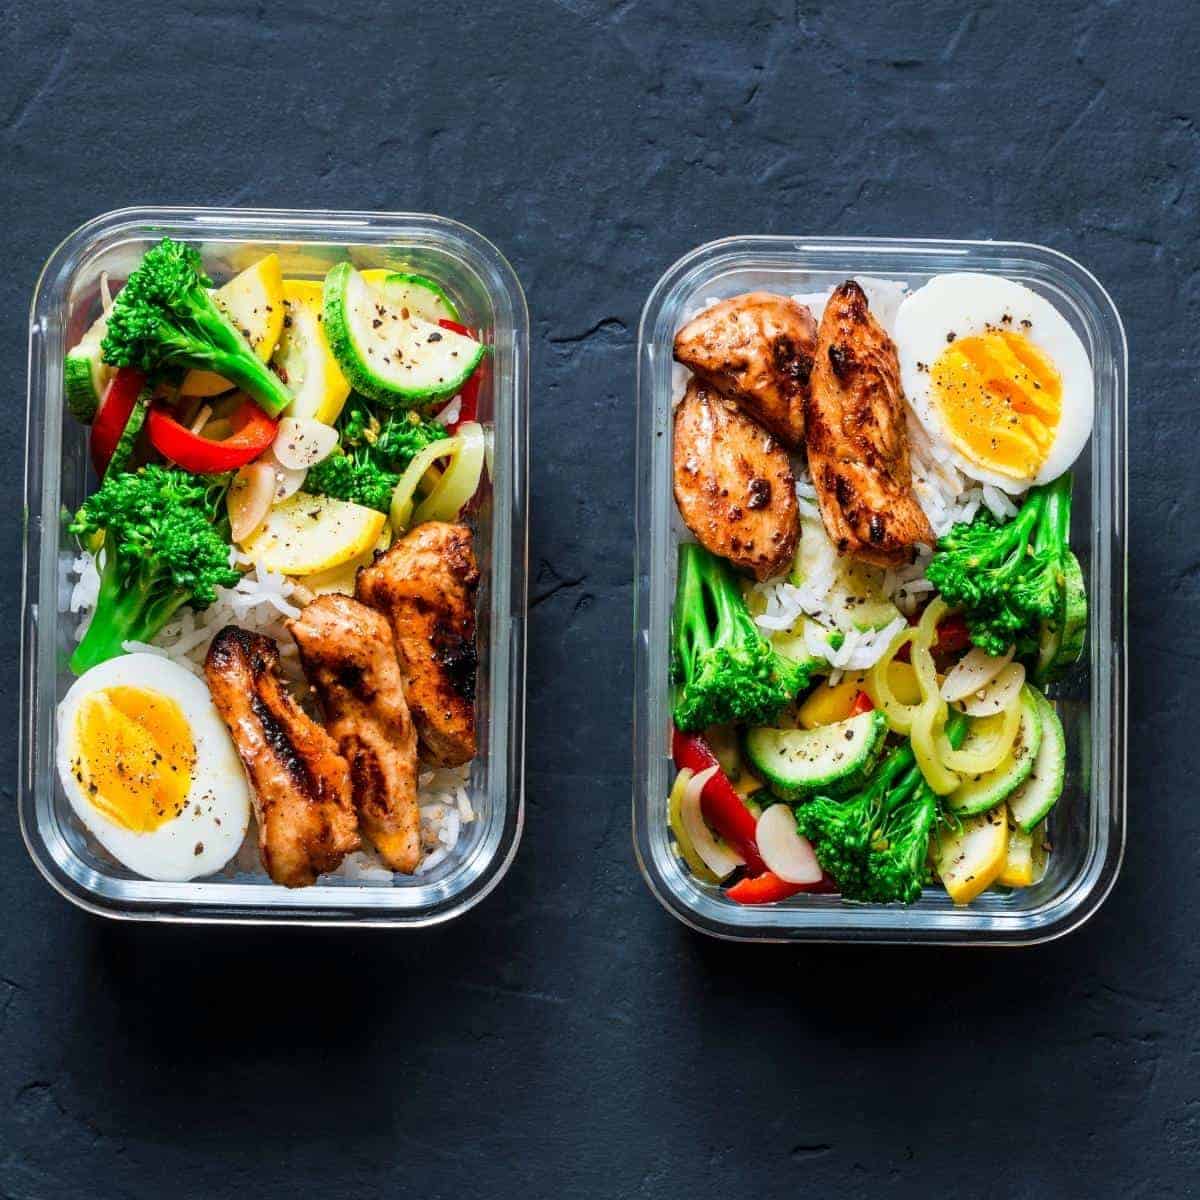 Slimming World lunch ideas for work or home with easy recipes